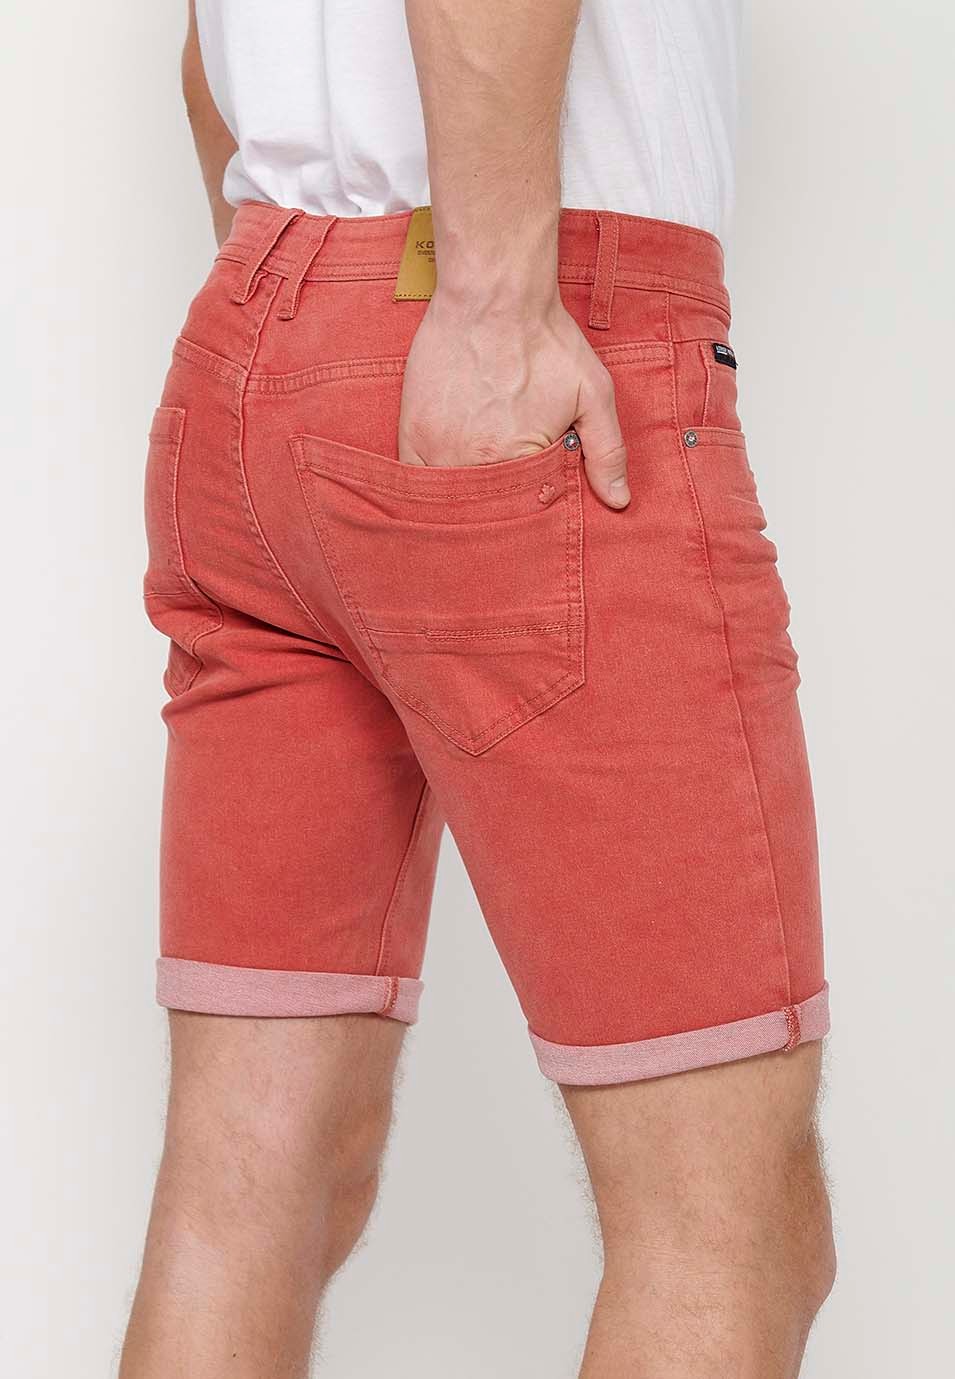 Shorts with a turn-up finish with front zipper and button closure and five pockets, one with a match pocket, in Red for Men 7